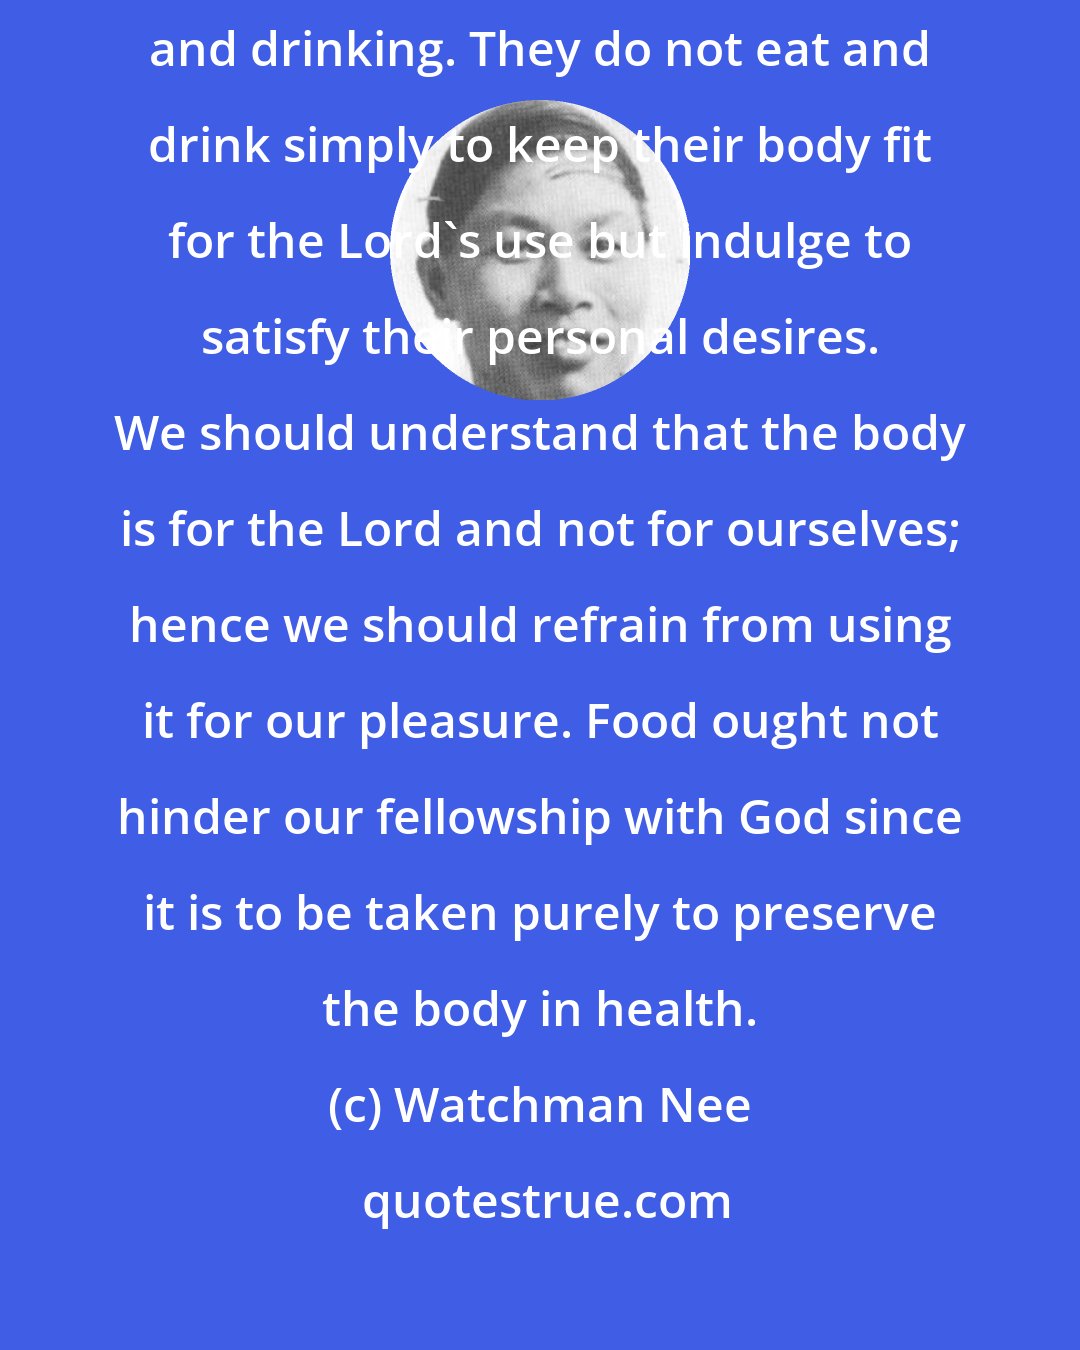 Watchman Nee: Numerous Christians do not know how to glorify God in their eating and drinking. They do not eat and drink simply to keep their body fit for the Lord's use but indulge to satisfy their personal desires. We should understand that the body is for the Lord and not for ourselves; hence we should refrain from using it for our pleasure. Food ought not hinder our fellowship with God since it is to be taken purely to preserve the body in health.